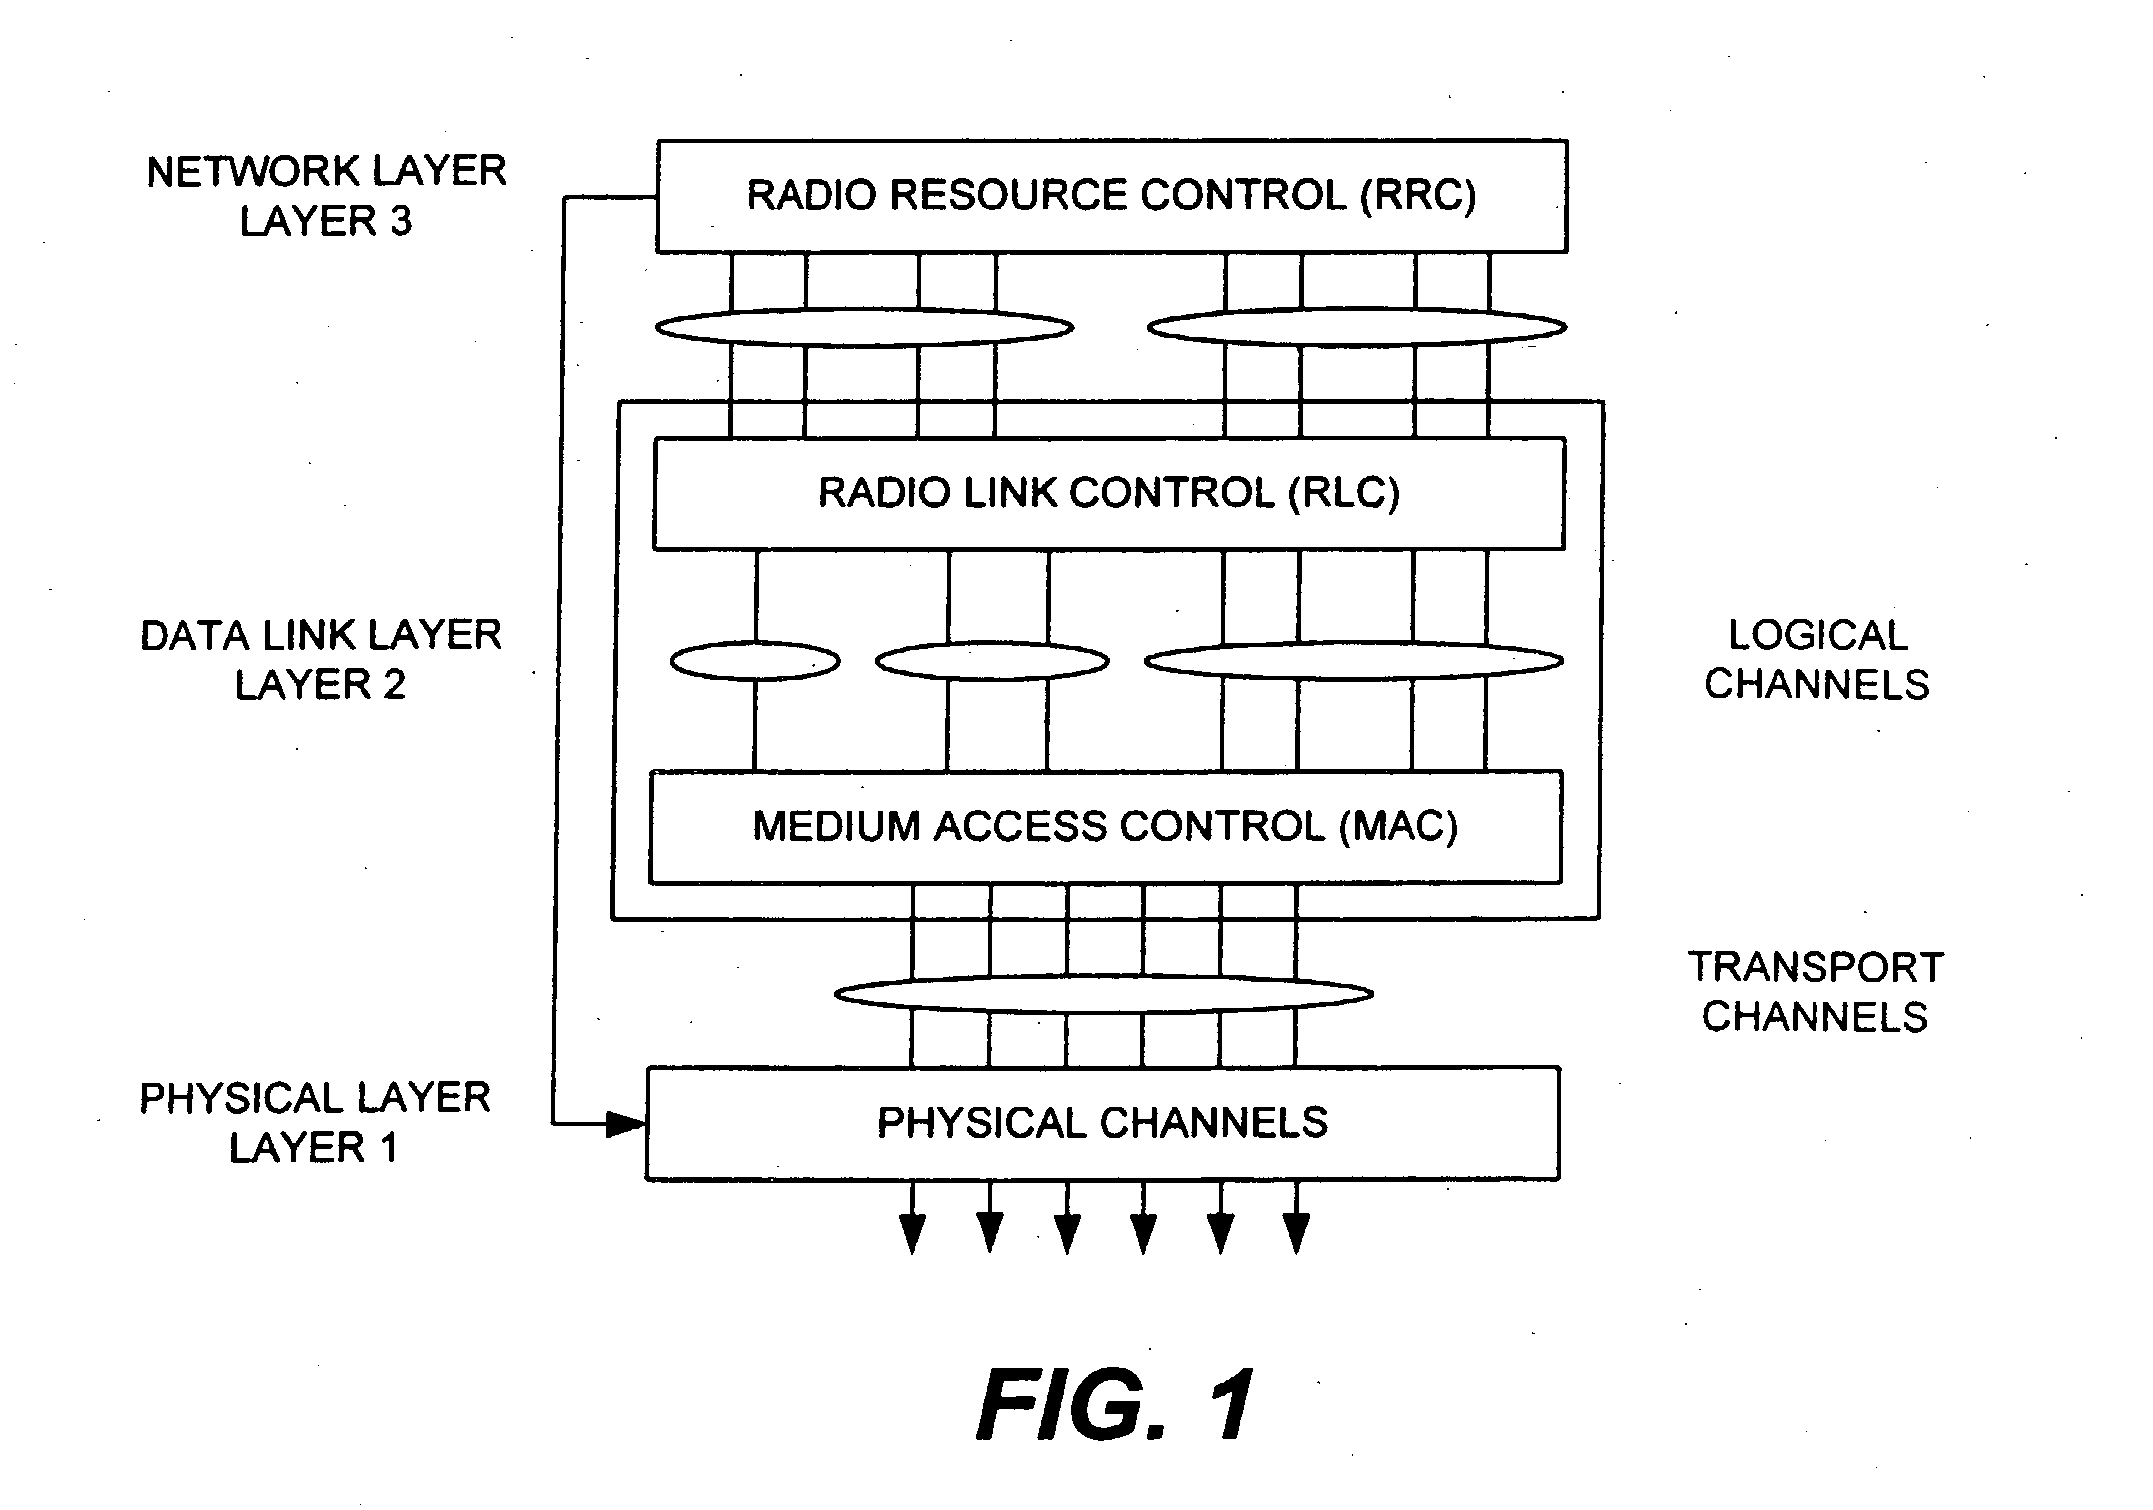 Methods and systems for assignment of user data blocks for transmission over a network